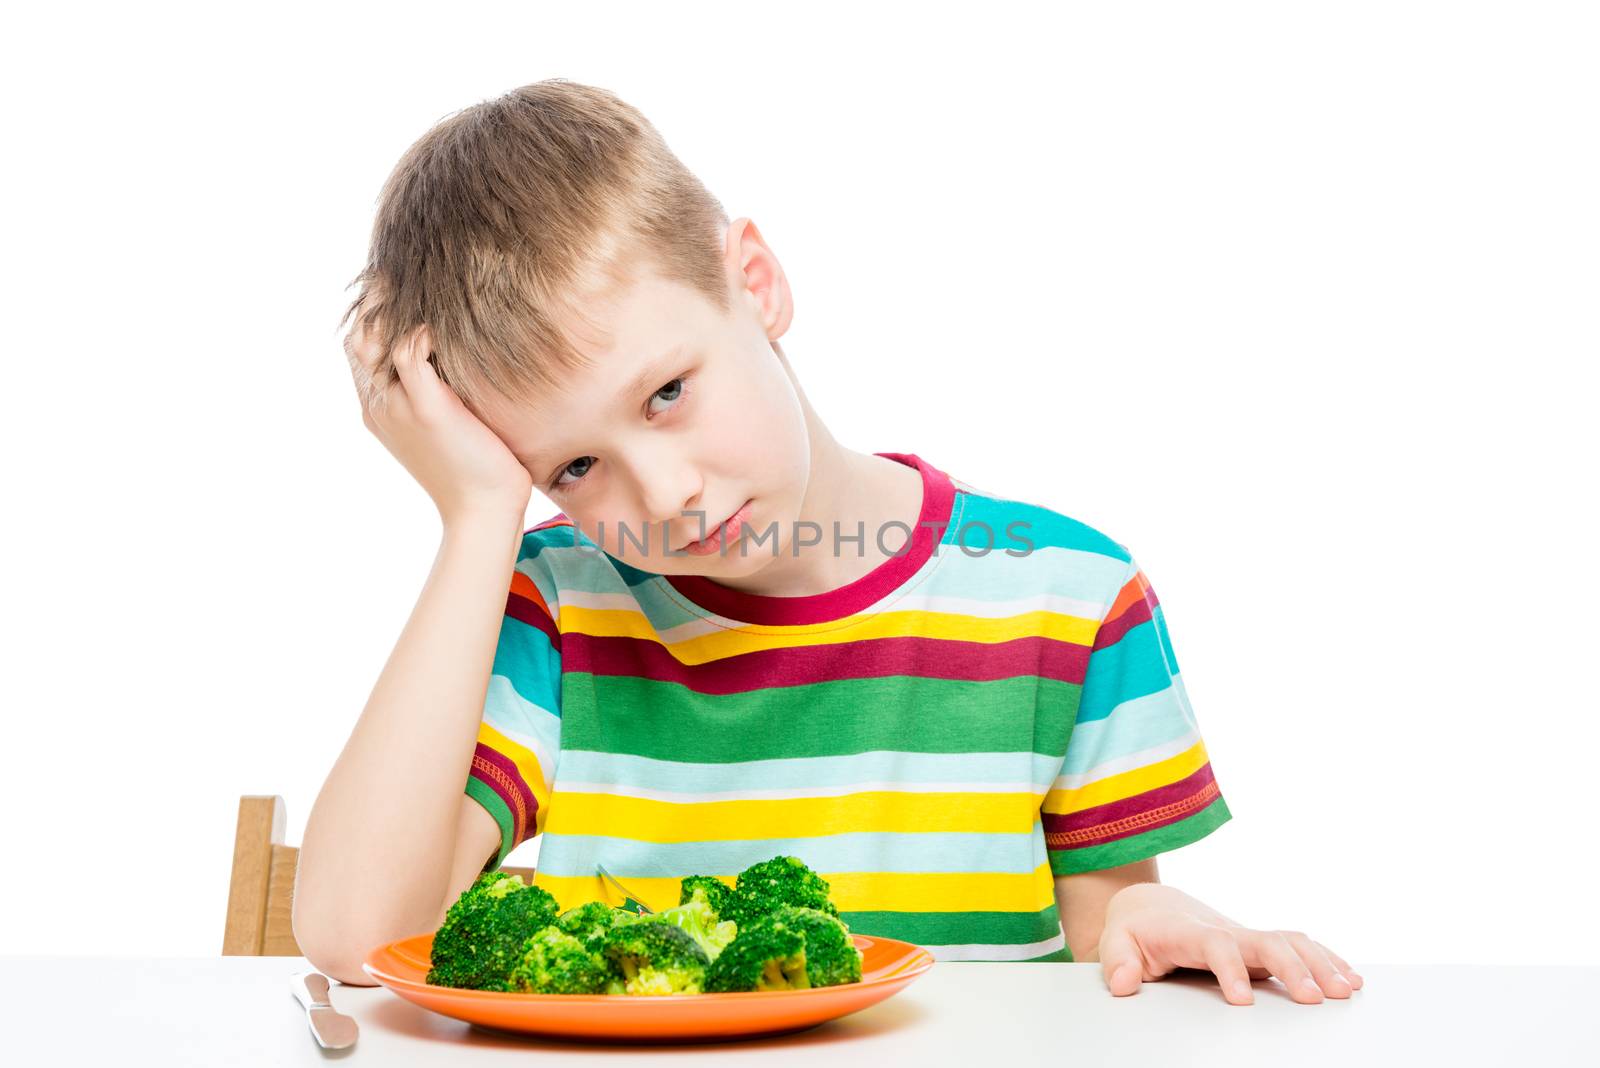 Sad child with a plate of broccoli at the table, portrait isolated